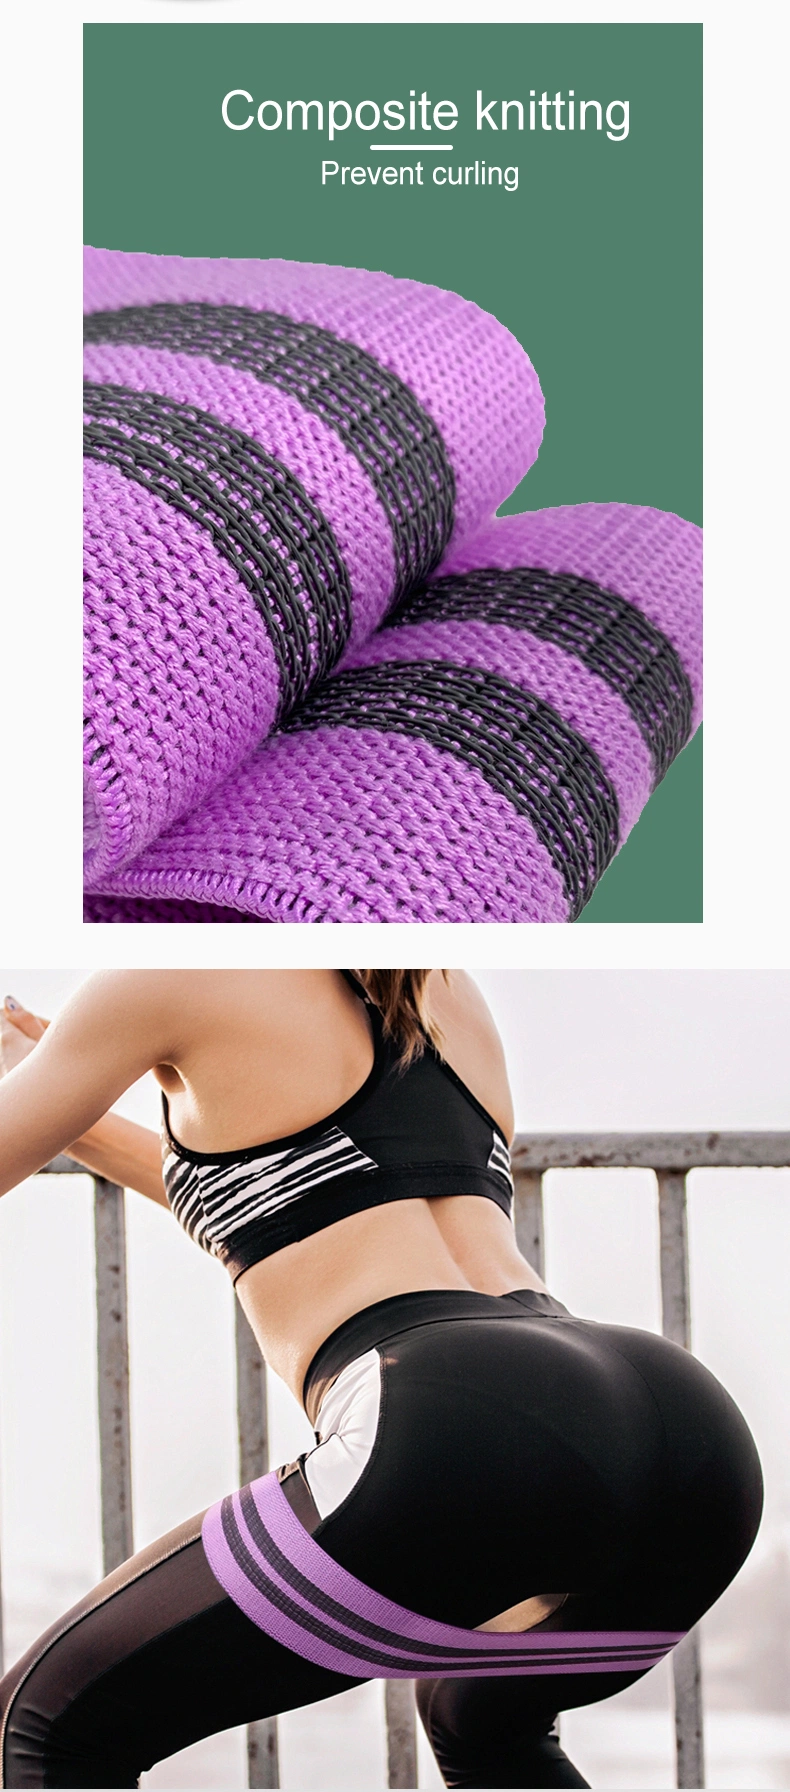 Hot Selling Anti Slip Fabric Booty Workout Hip Exercise Bands Elastic Circle Resistance Fitness Band